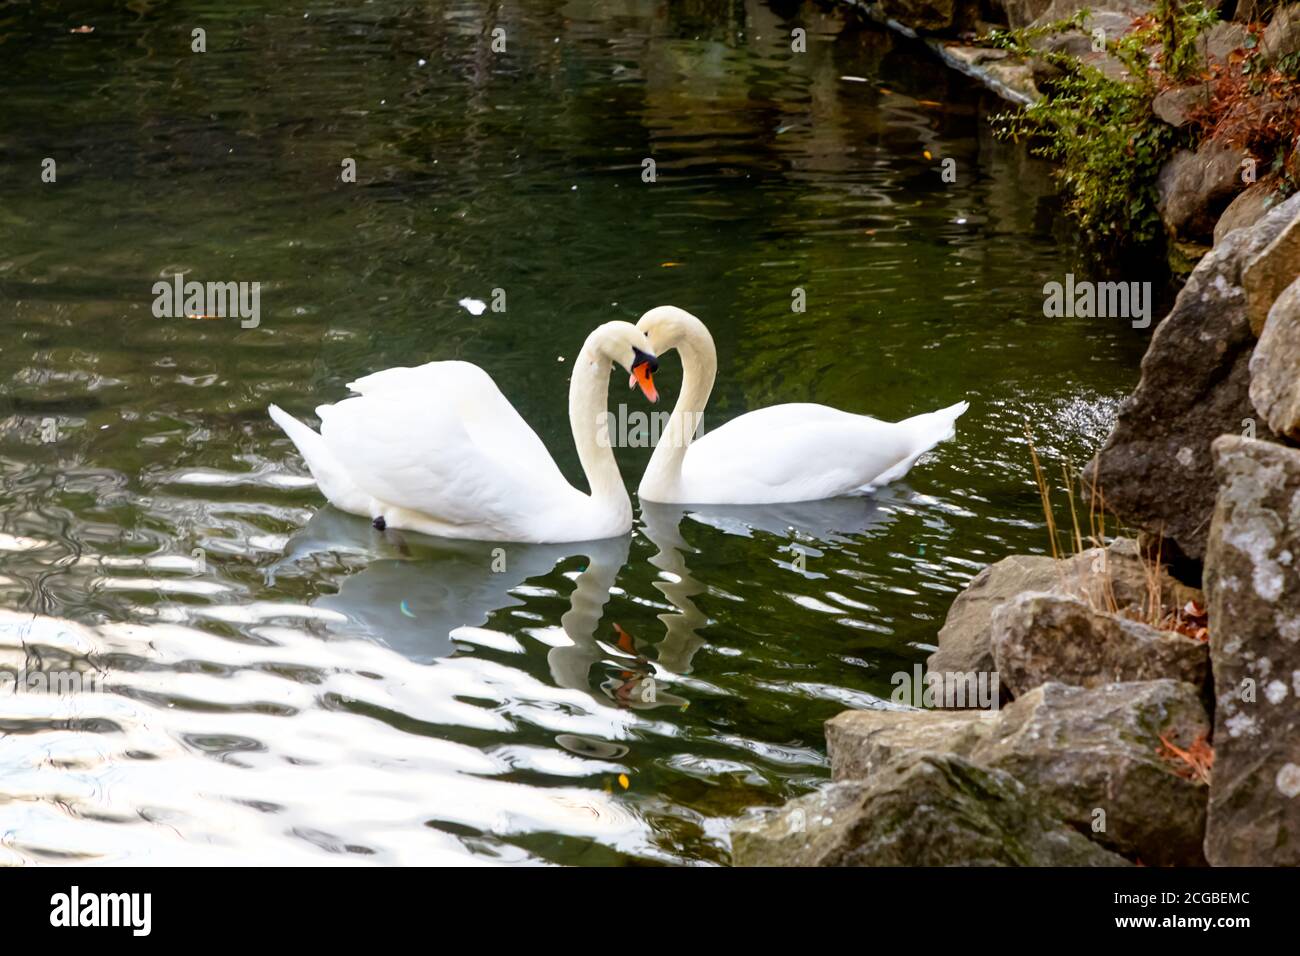 Two white swans in the pond arched their necks in the shape of hearts Stock Photo